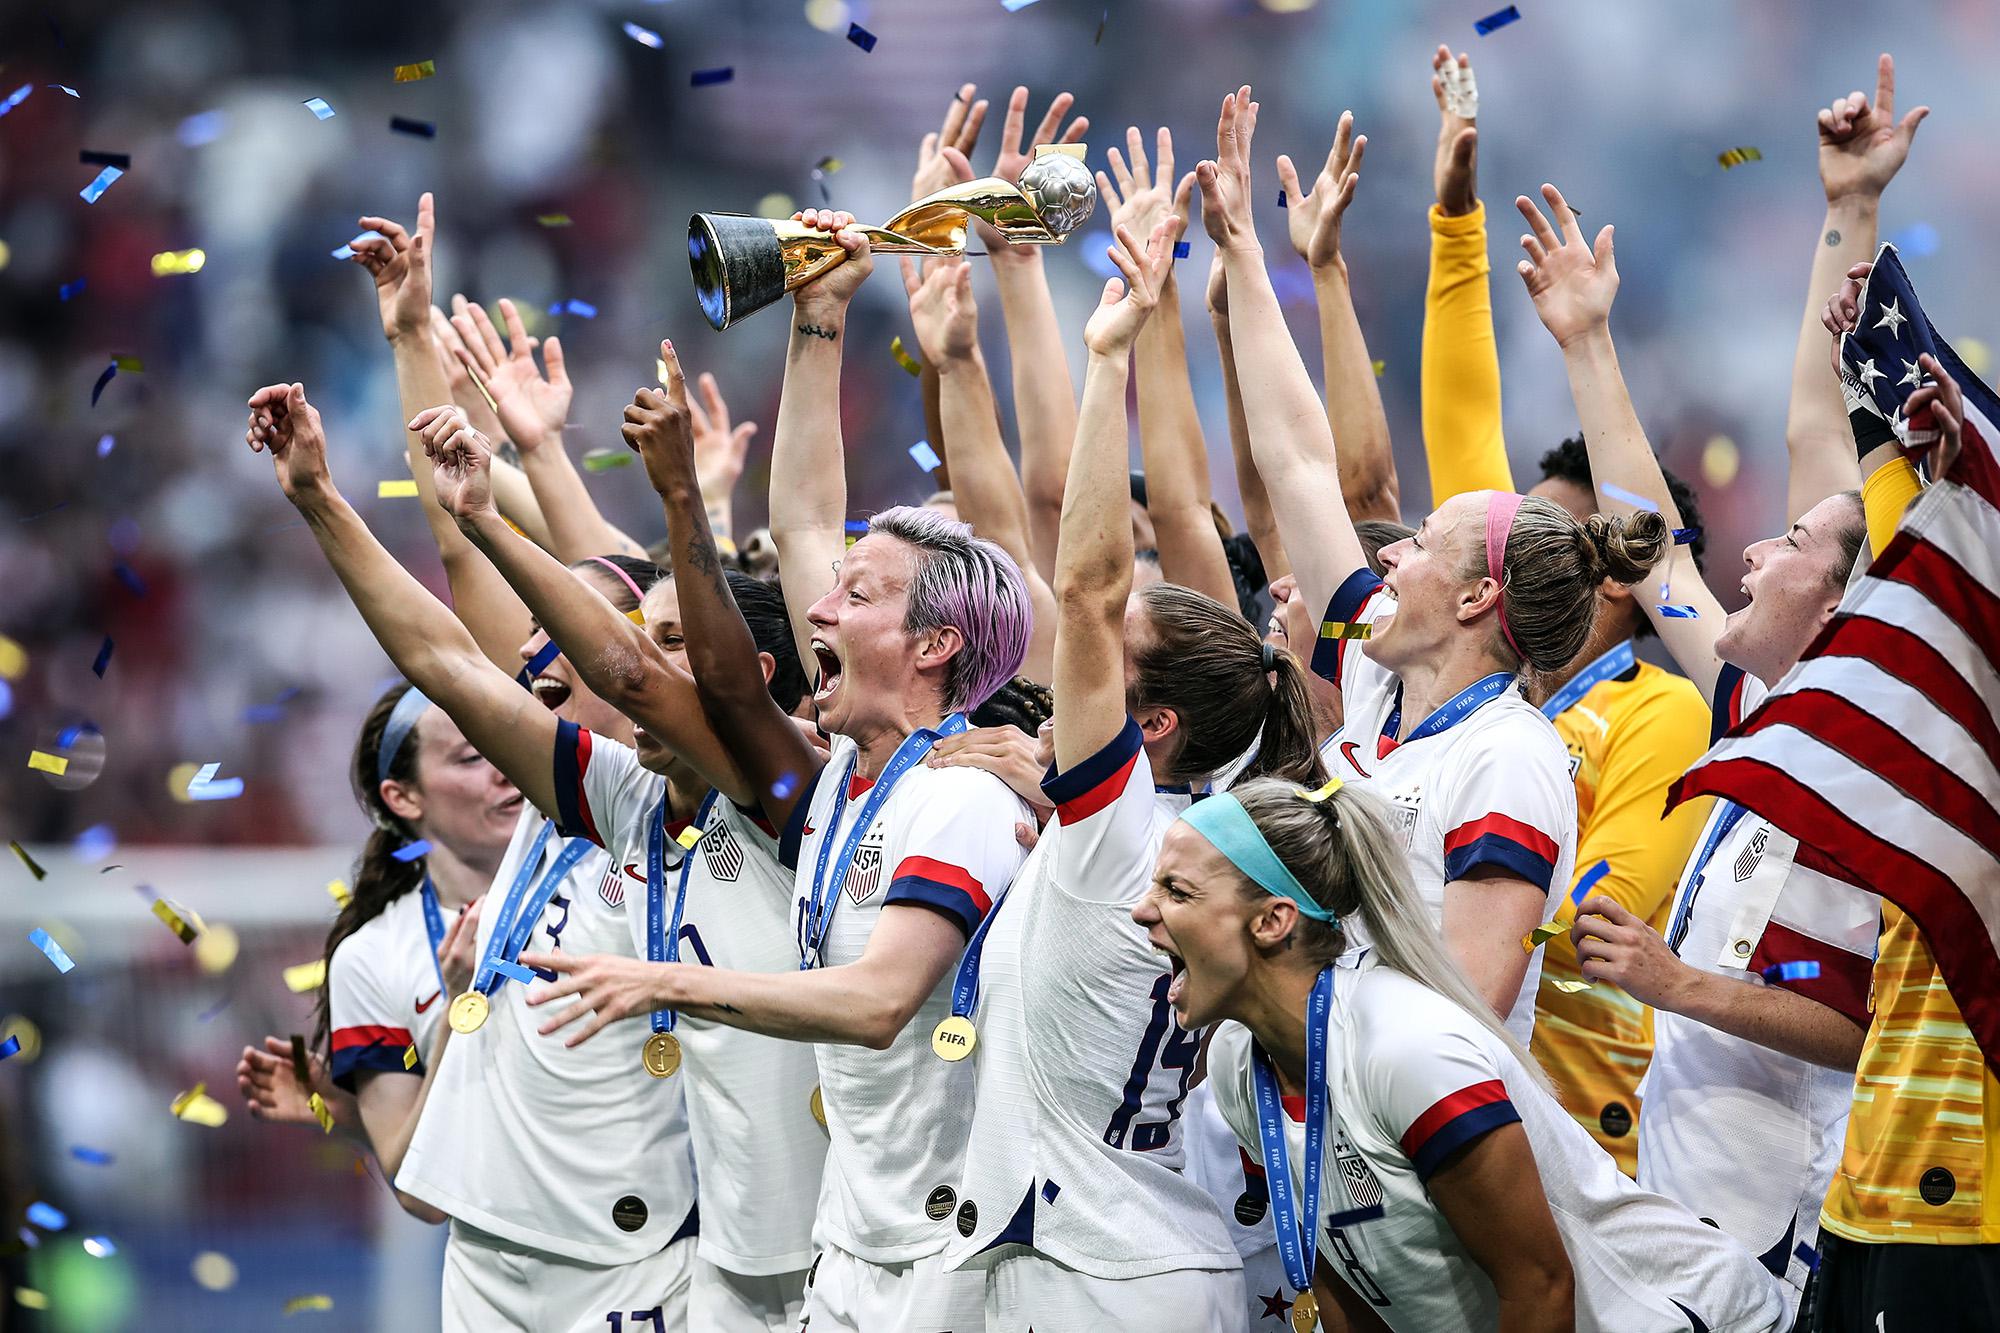 Can women’s soccer in the U.S. grow from World Cup popularity?